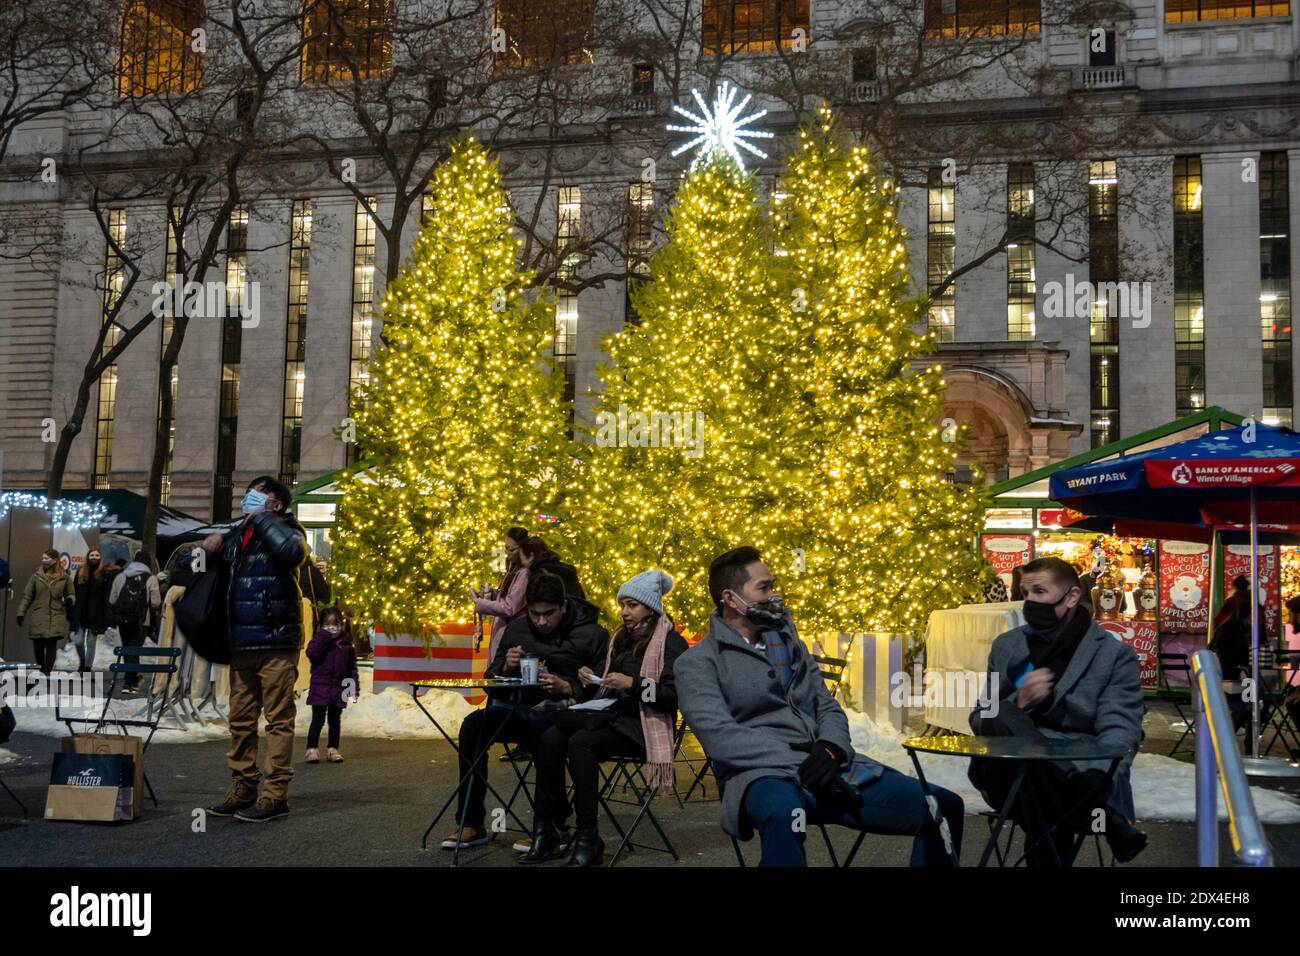 People enjoying the brightly lit Christmas trees in Bryant Park's holiday village on a wintry evening, New York City, USA Stock Photo